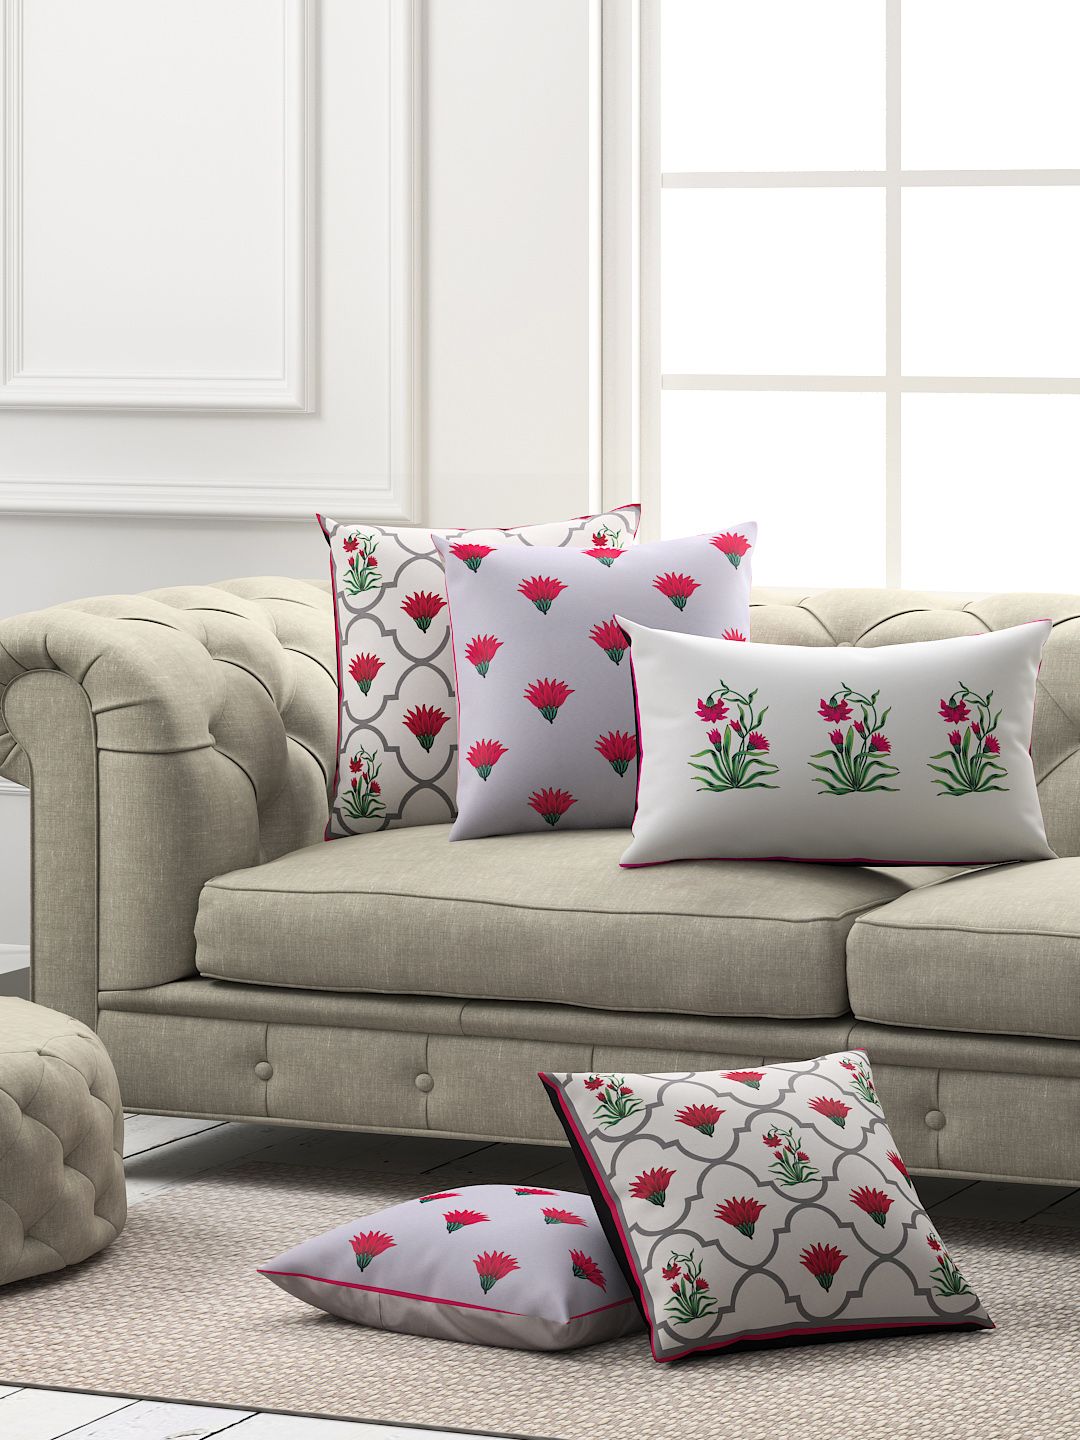 SEJ by Nisha Gupta Pink & Grey Set of 5 Floral Square Cushion Covers Price in India